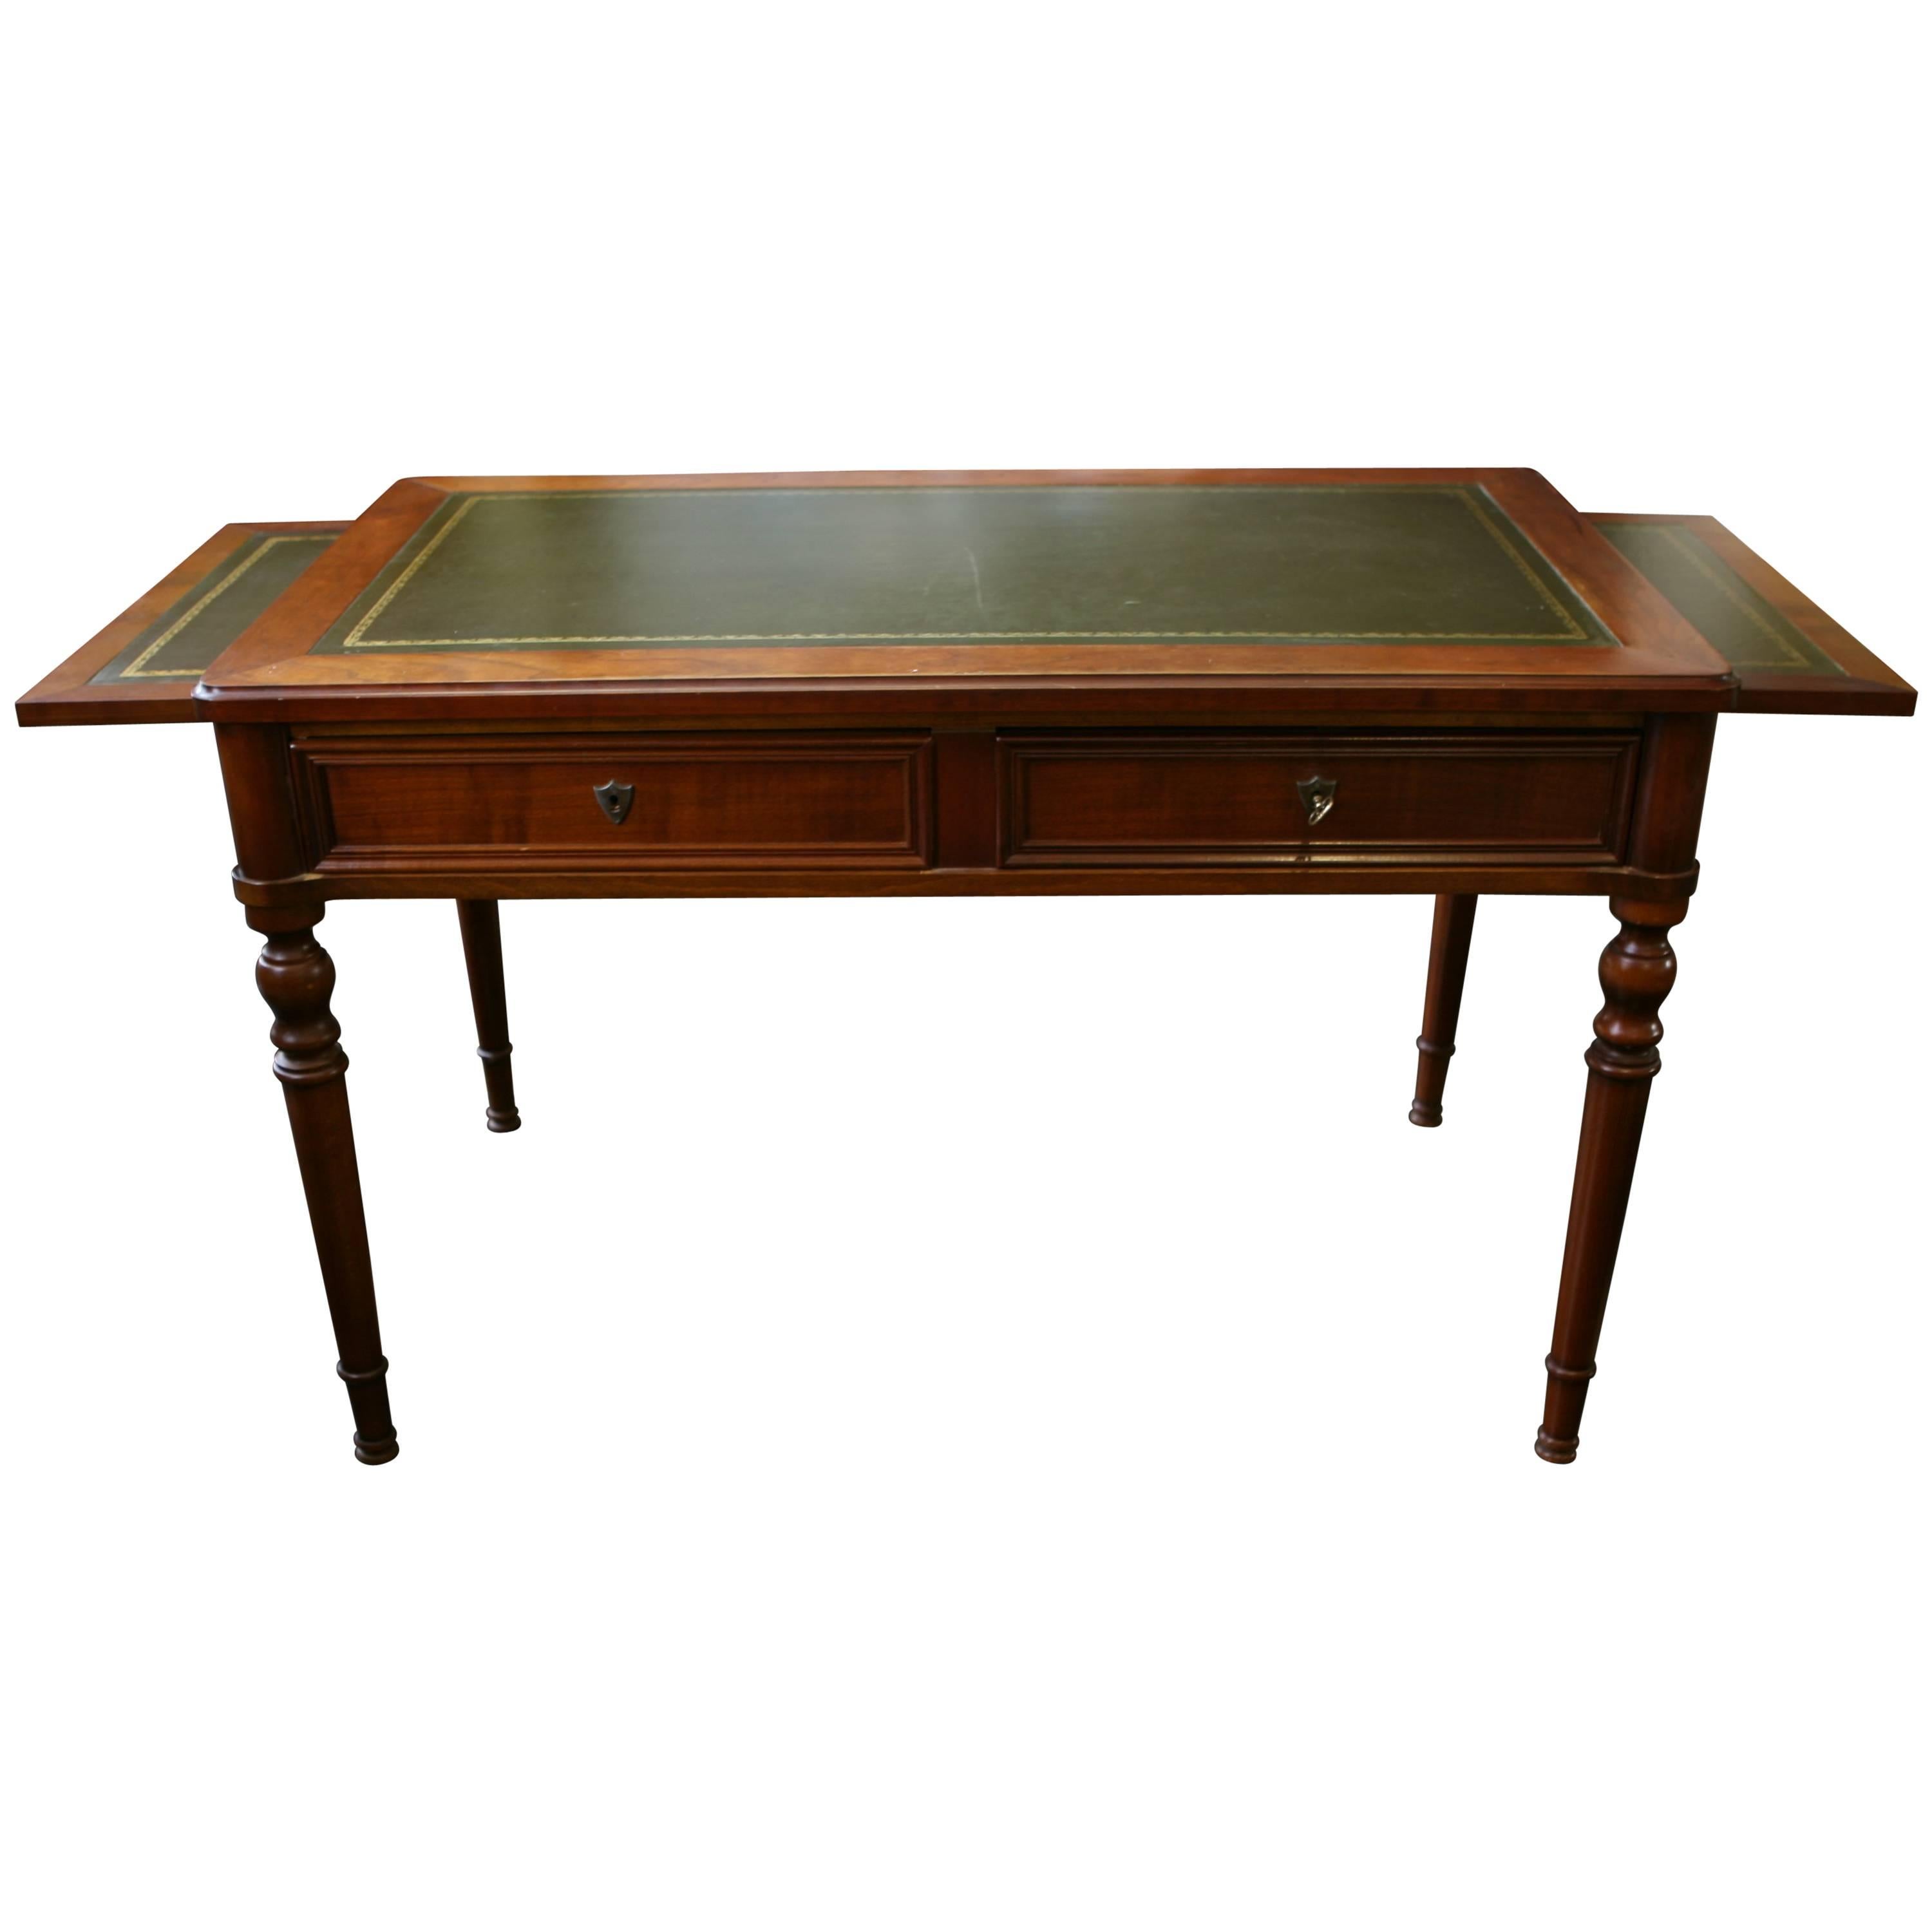 Antique French Writing Table with Green Leather Top, circa 1880